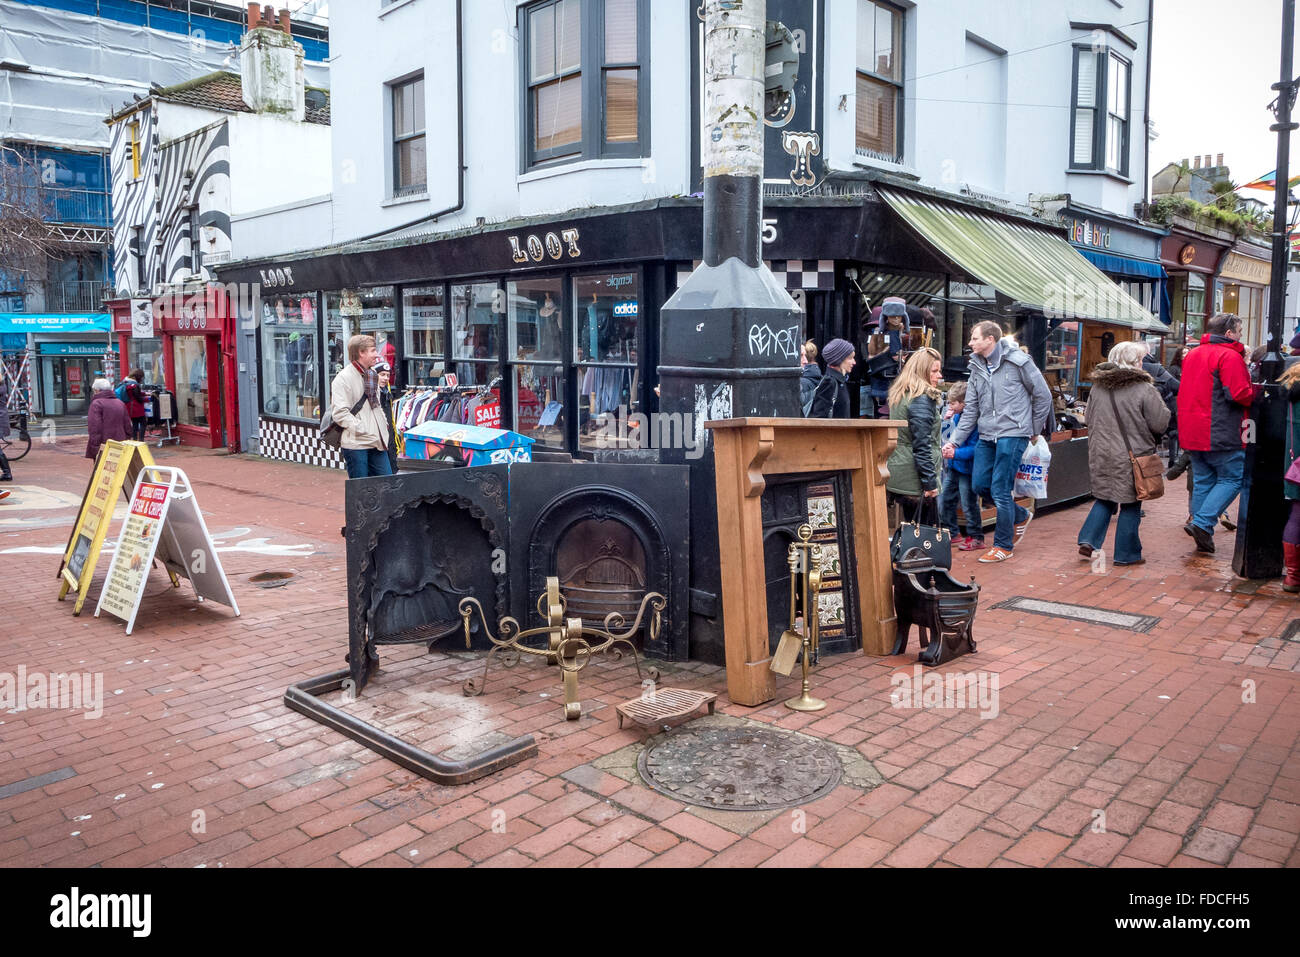 Antique furniture on display in the street in Brighton's North Laine area. Stock Photo